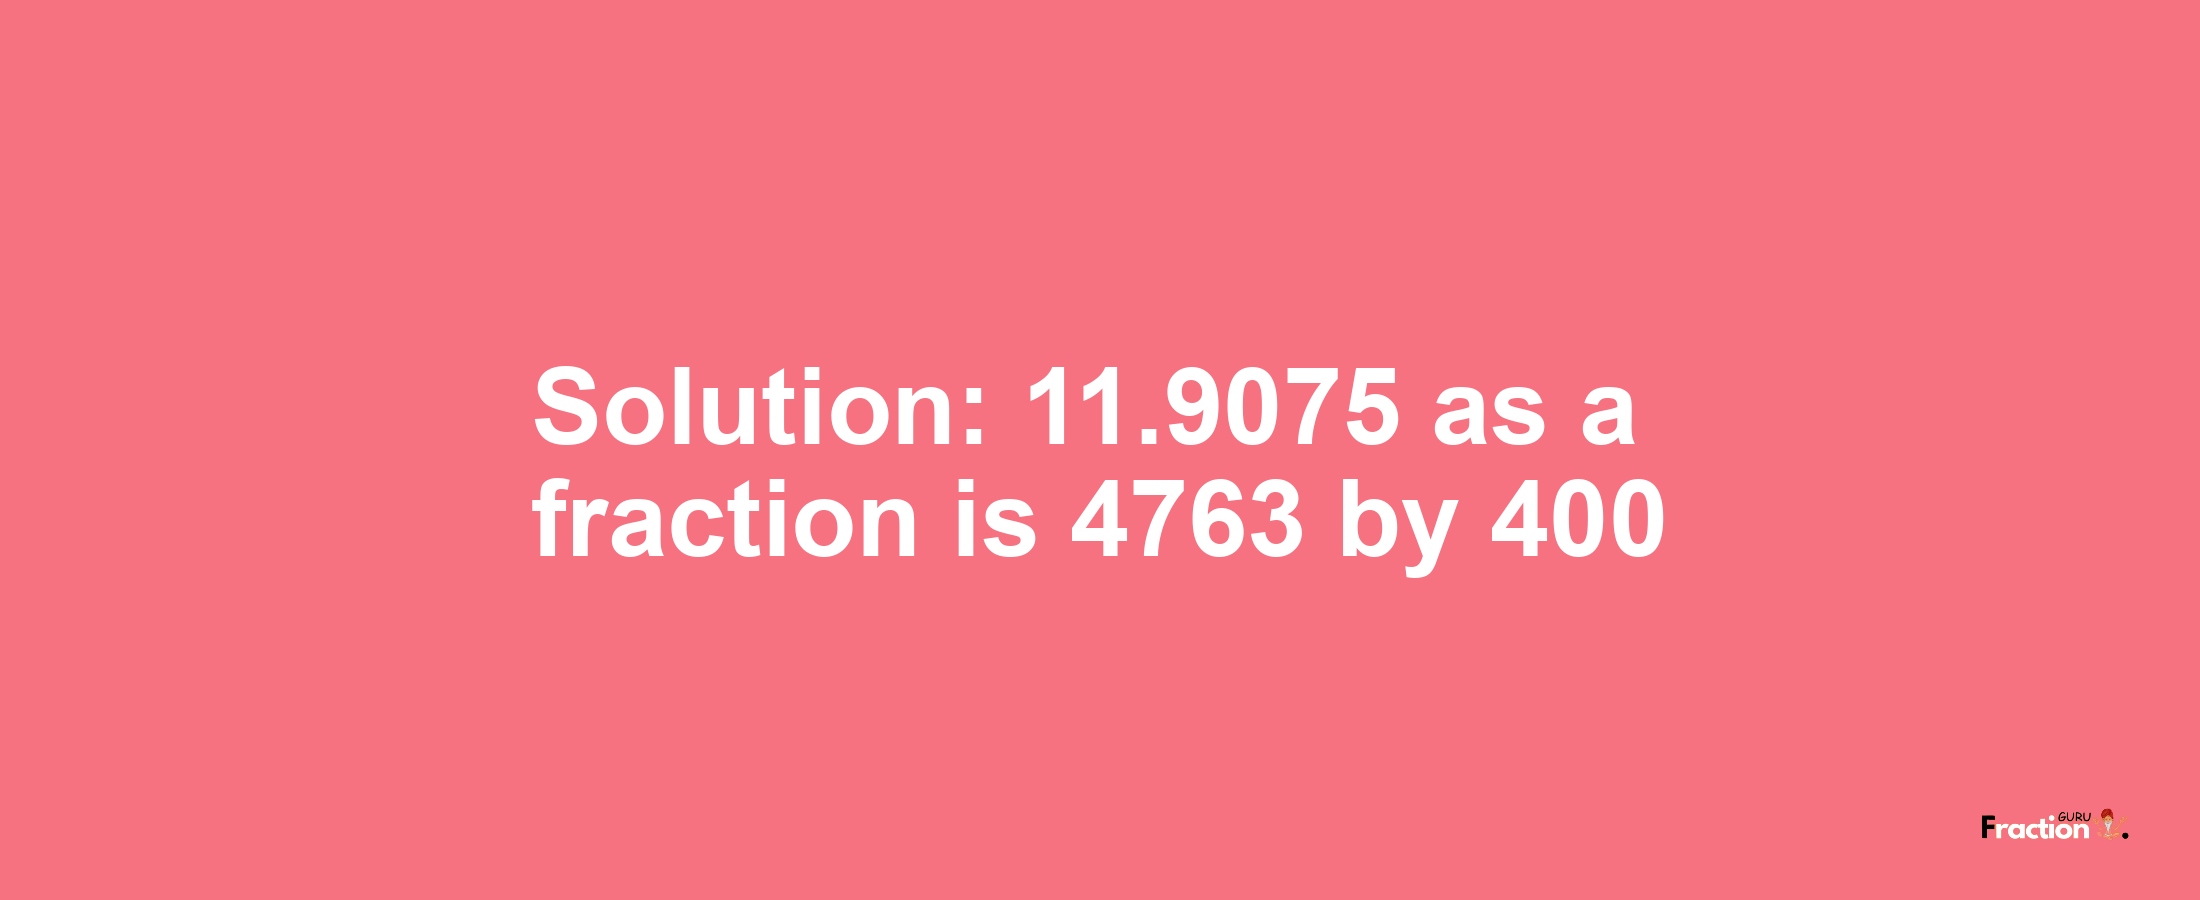 Solution:11.9075 as a fraction is 4763/400